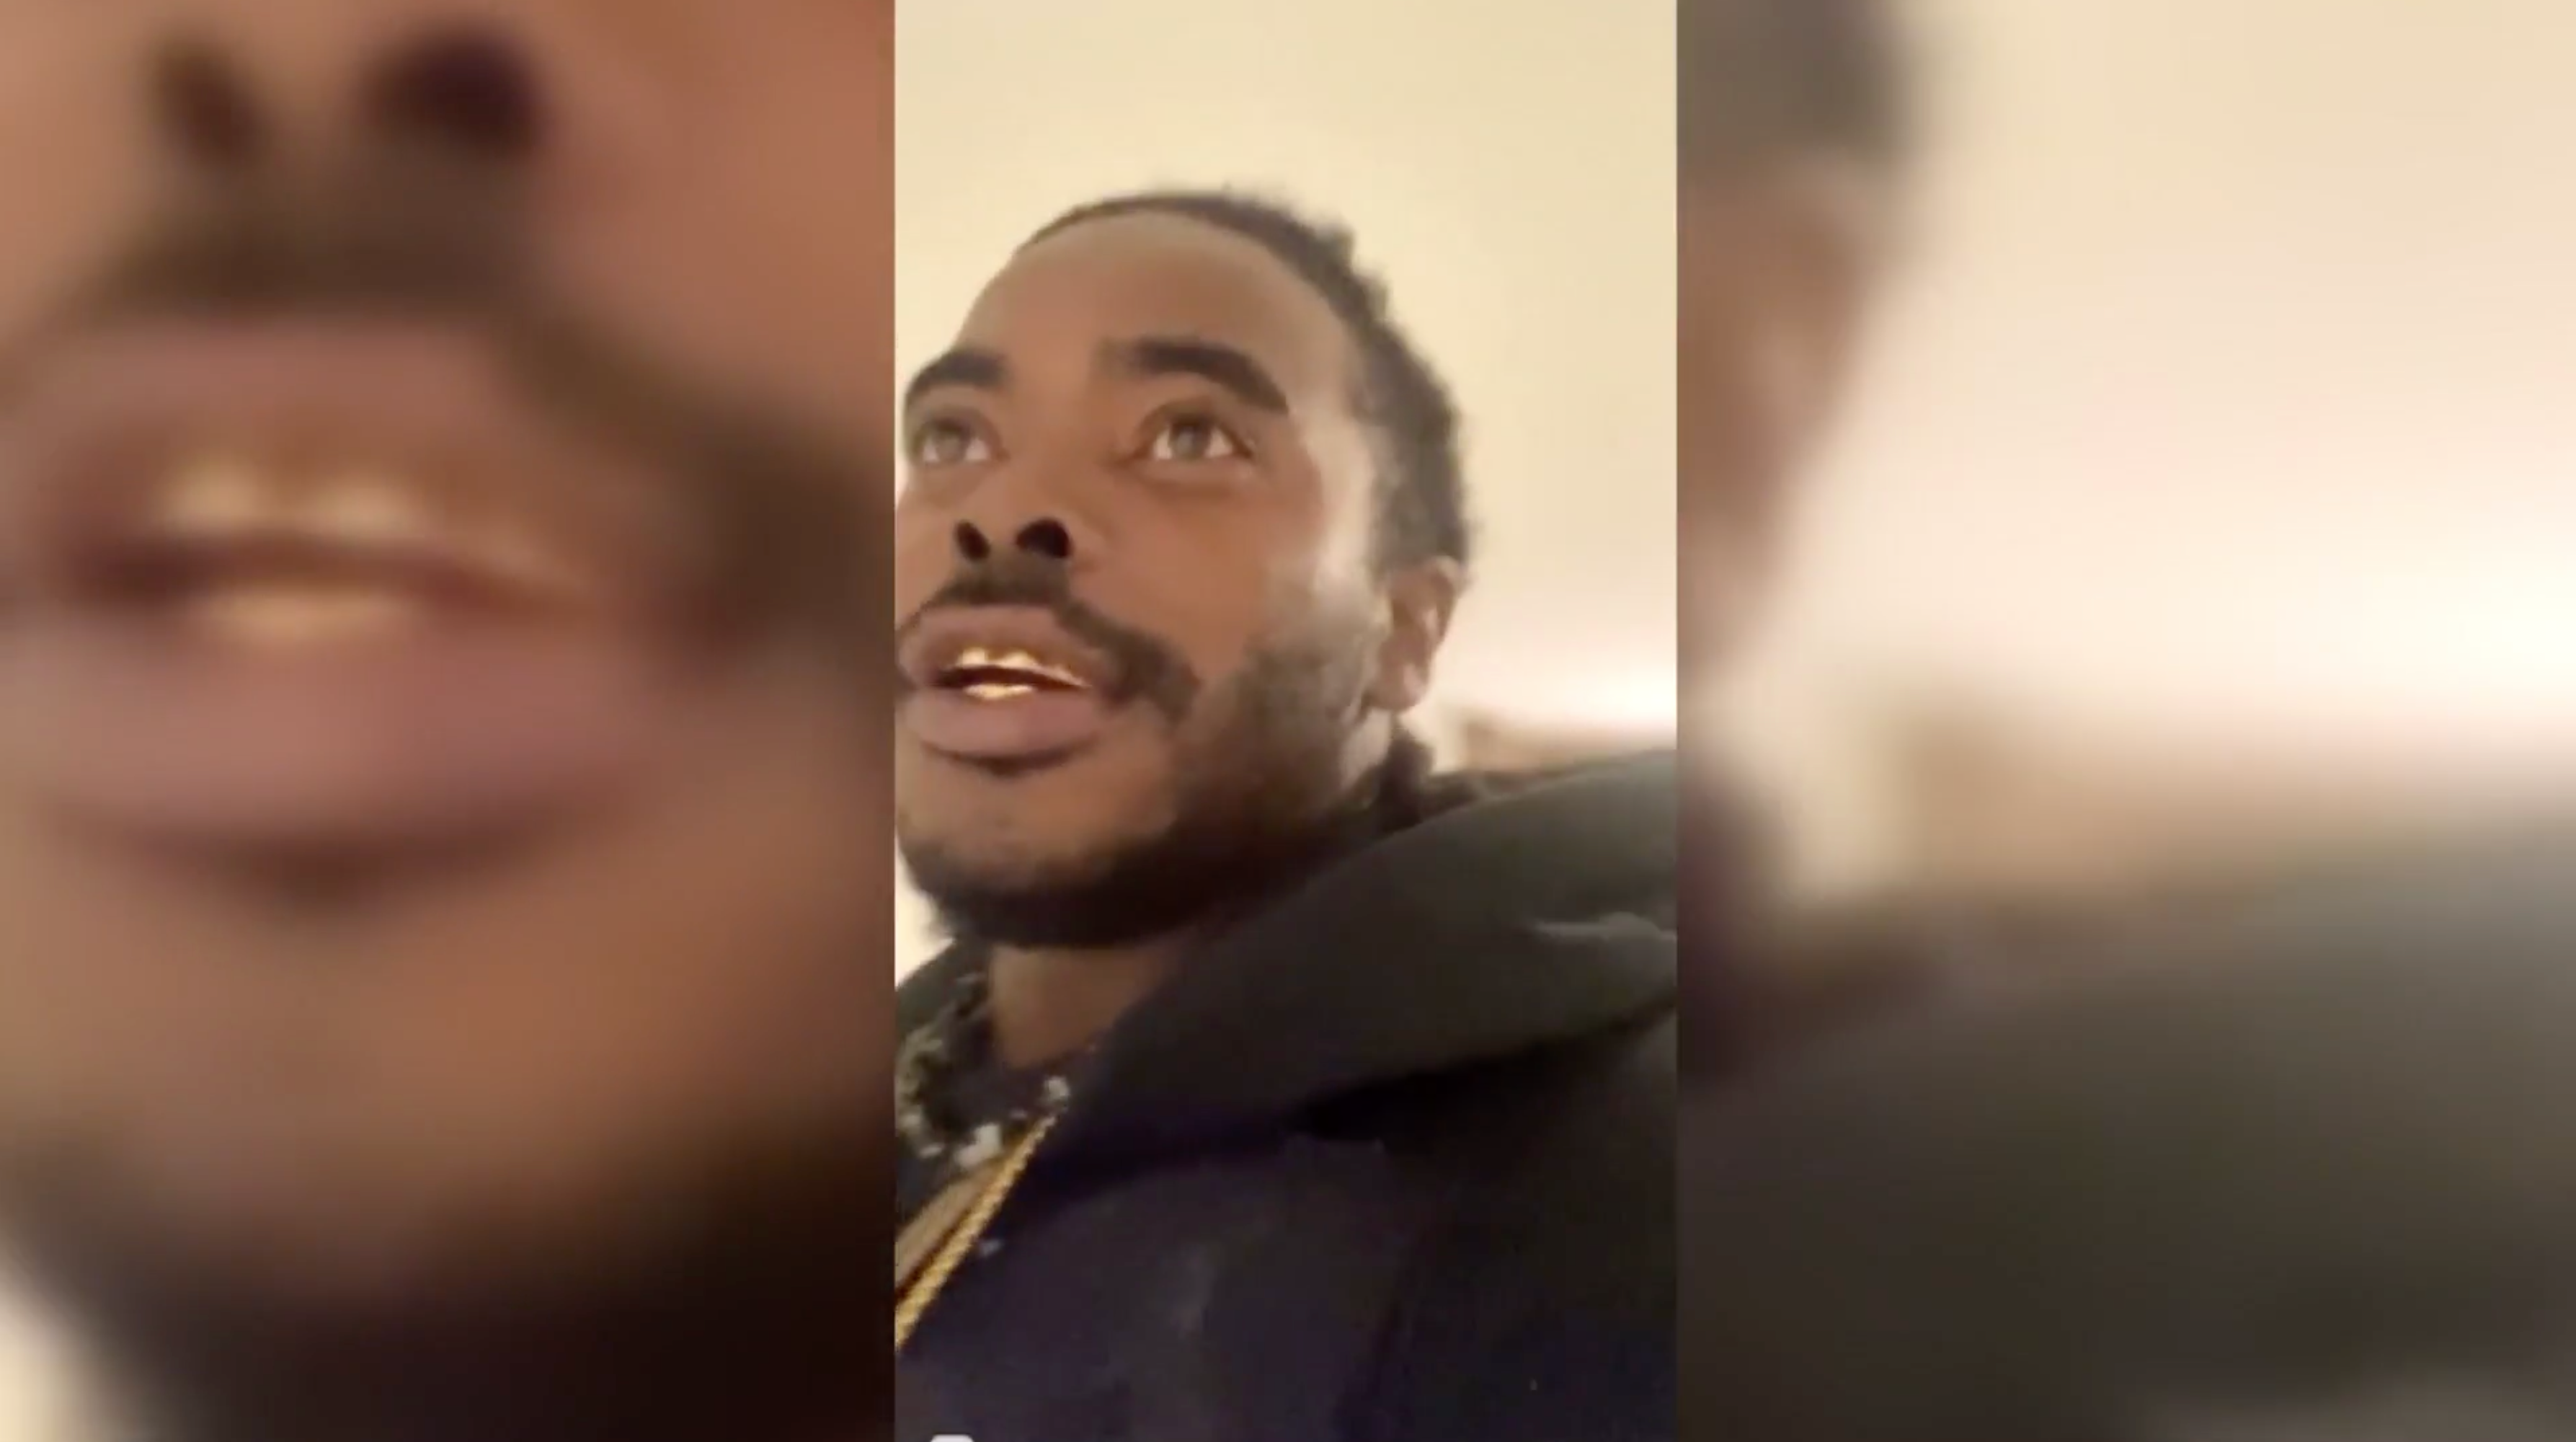 Protester Cortez Rice posted a video of himself outside what he believed to be Judge Regina Chu’s door